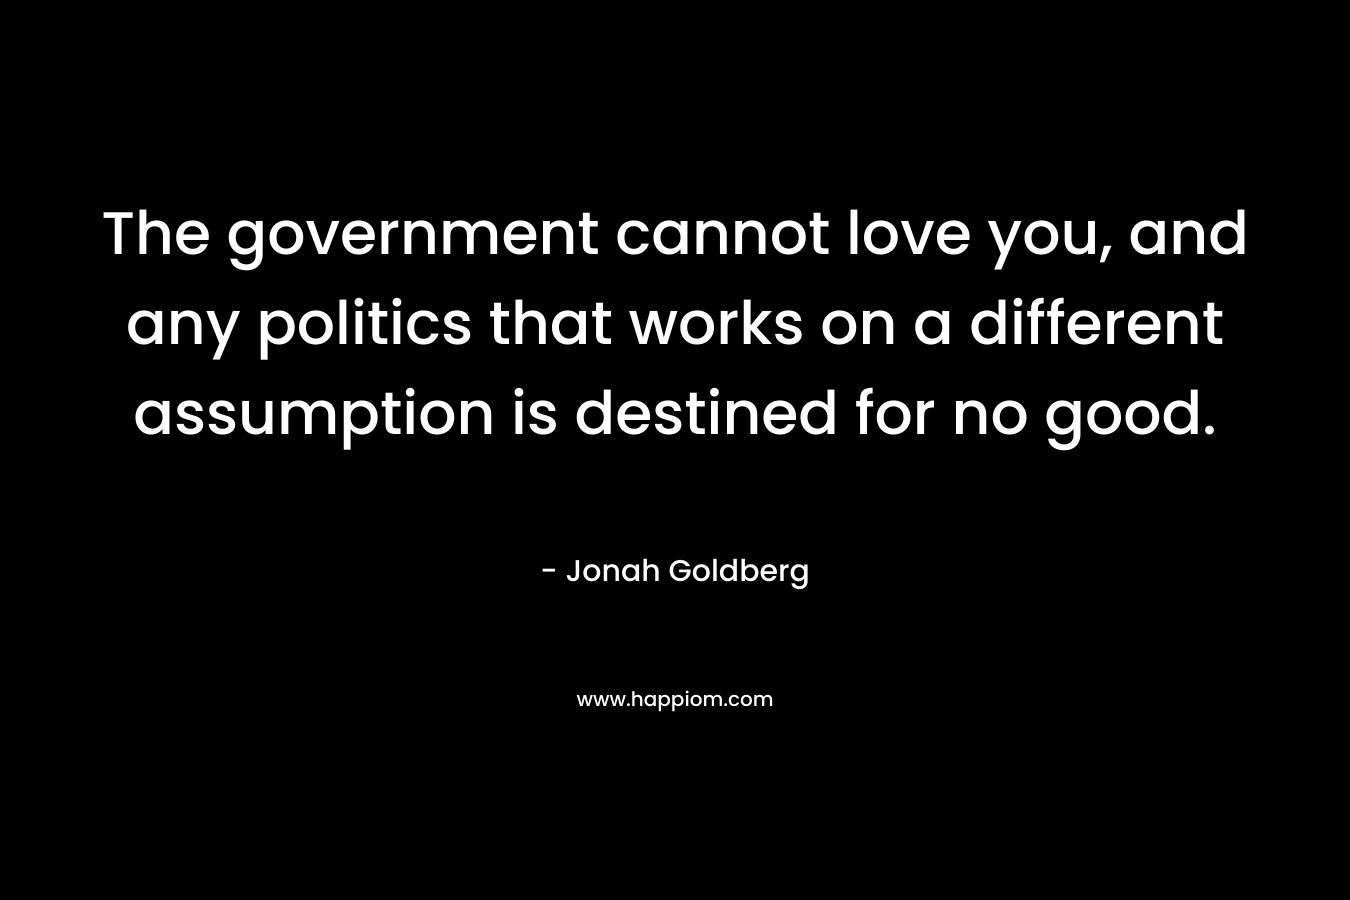 The government cannot love you, and any politics that works on a different assumption is destined for no good.